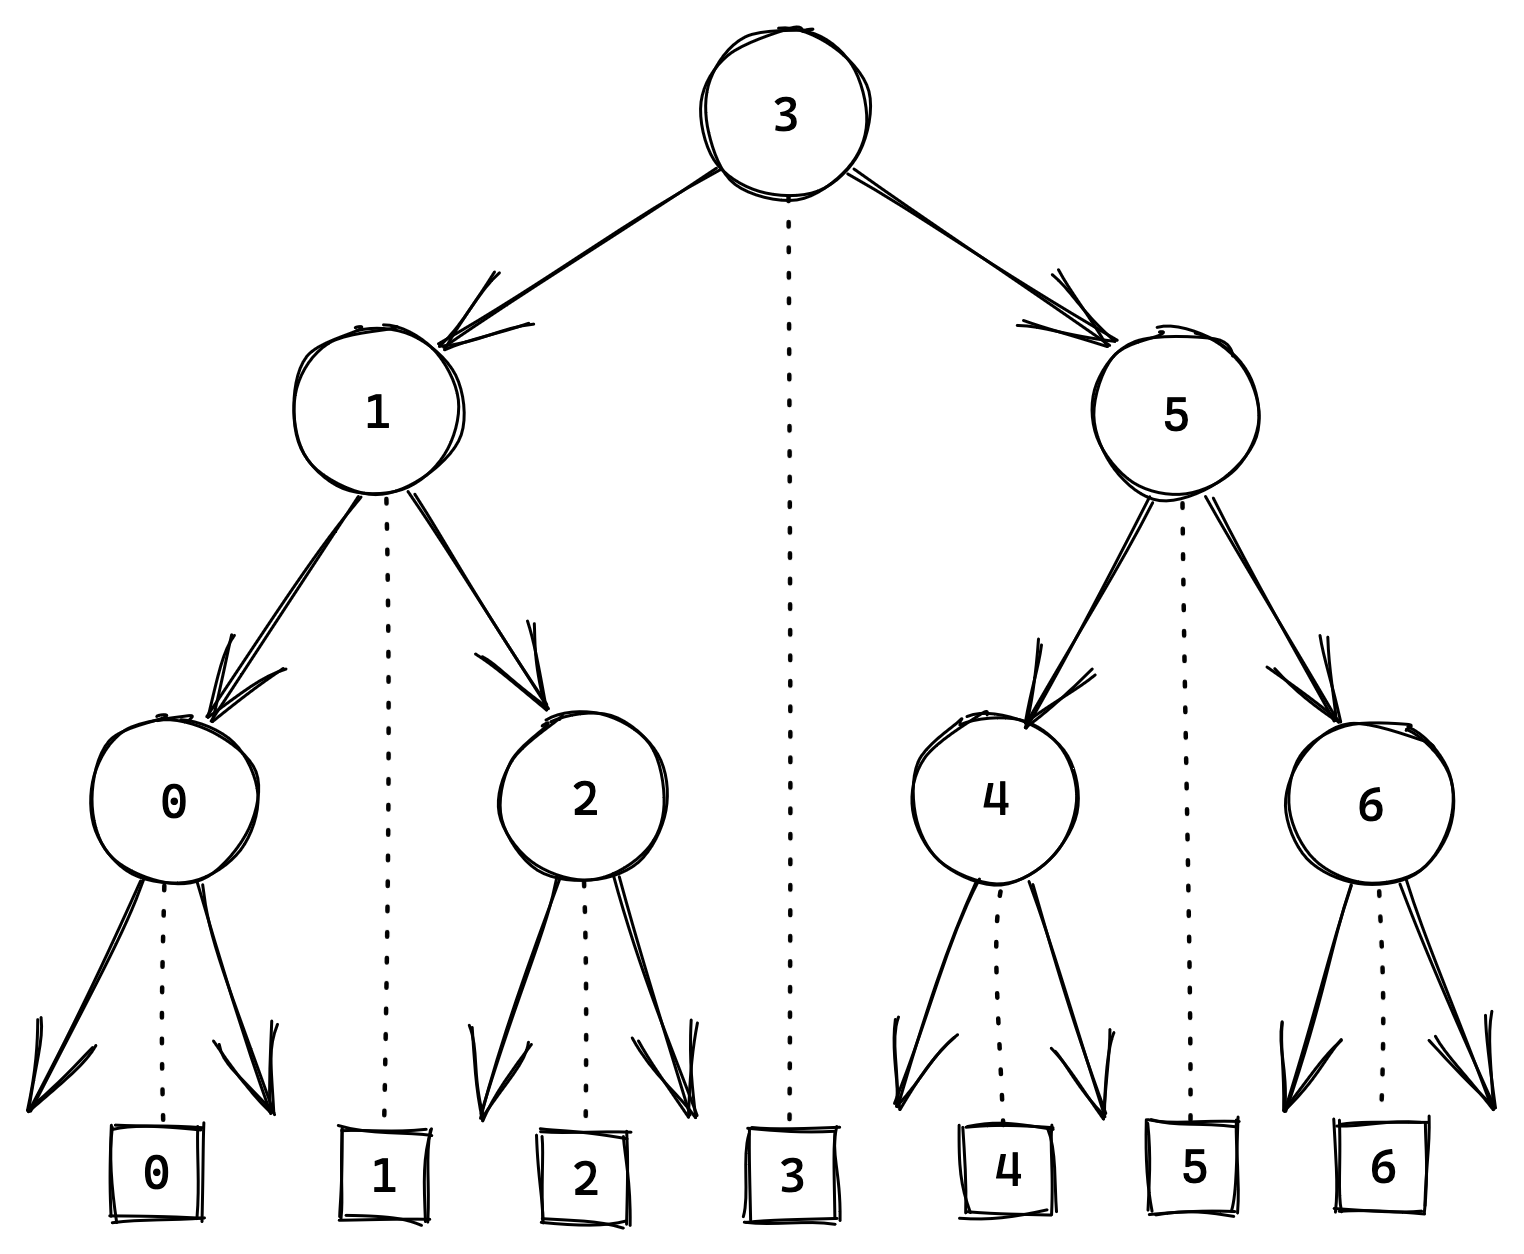 A full binary search tree of size 7.